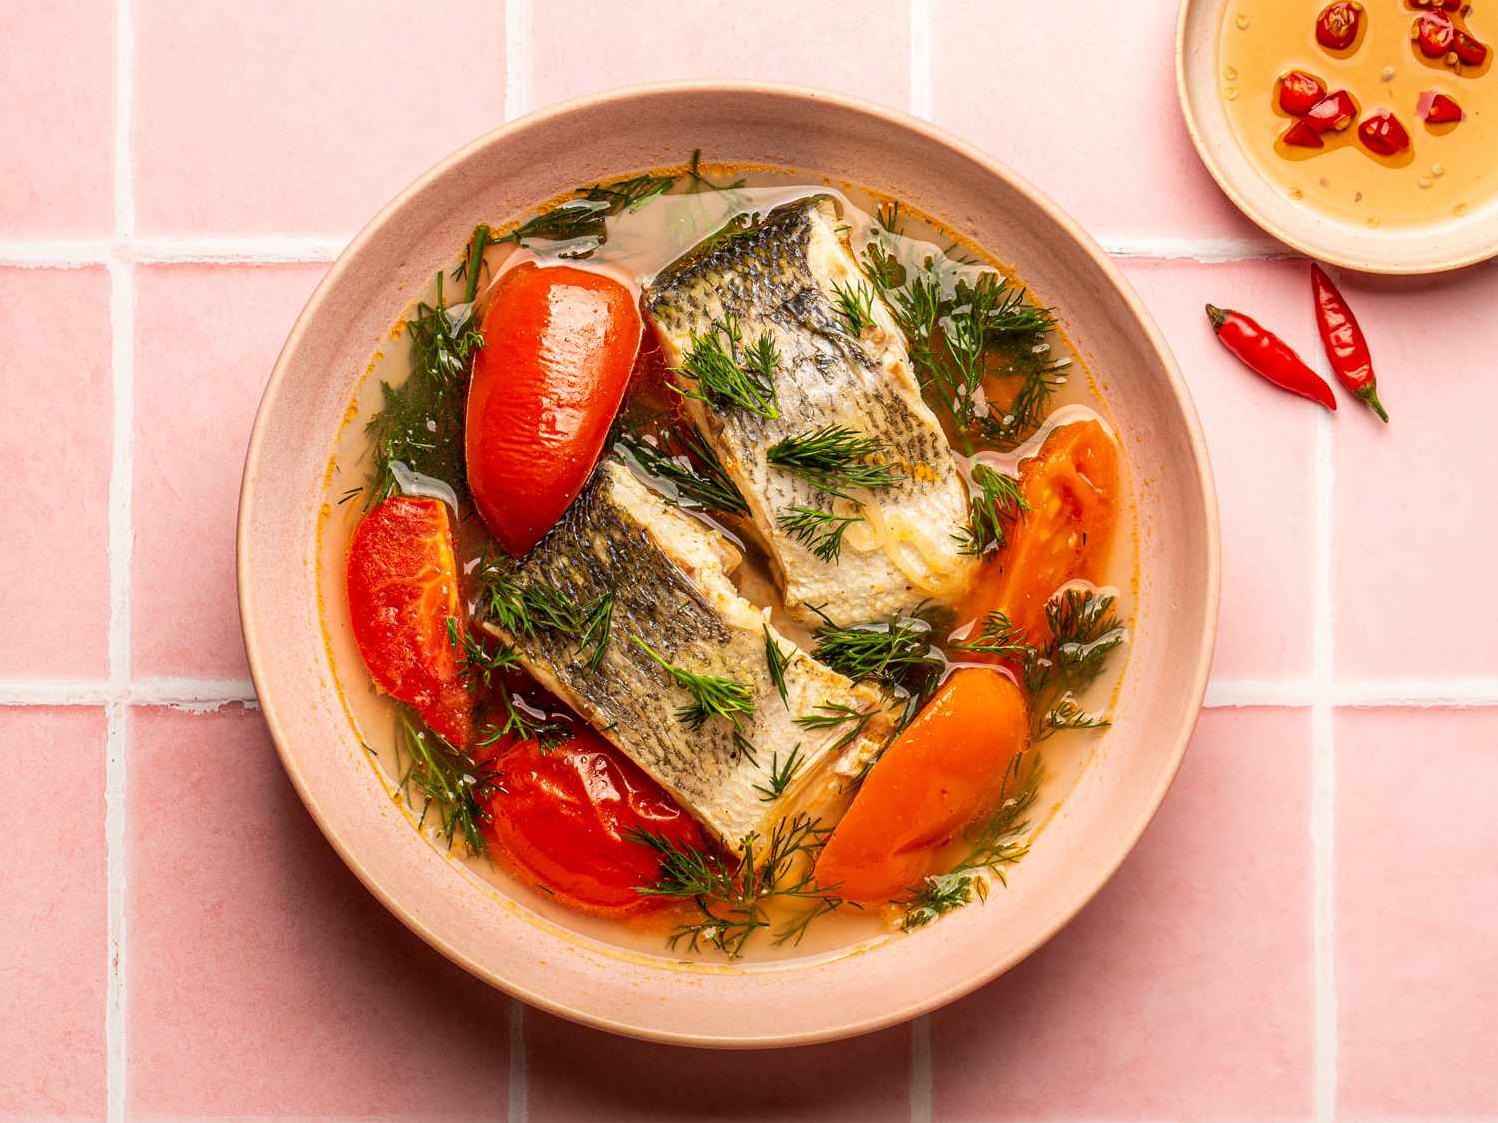  Your loved ones will be impressed when they taste this exotic Vietnamese soup.